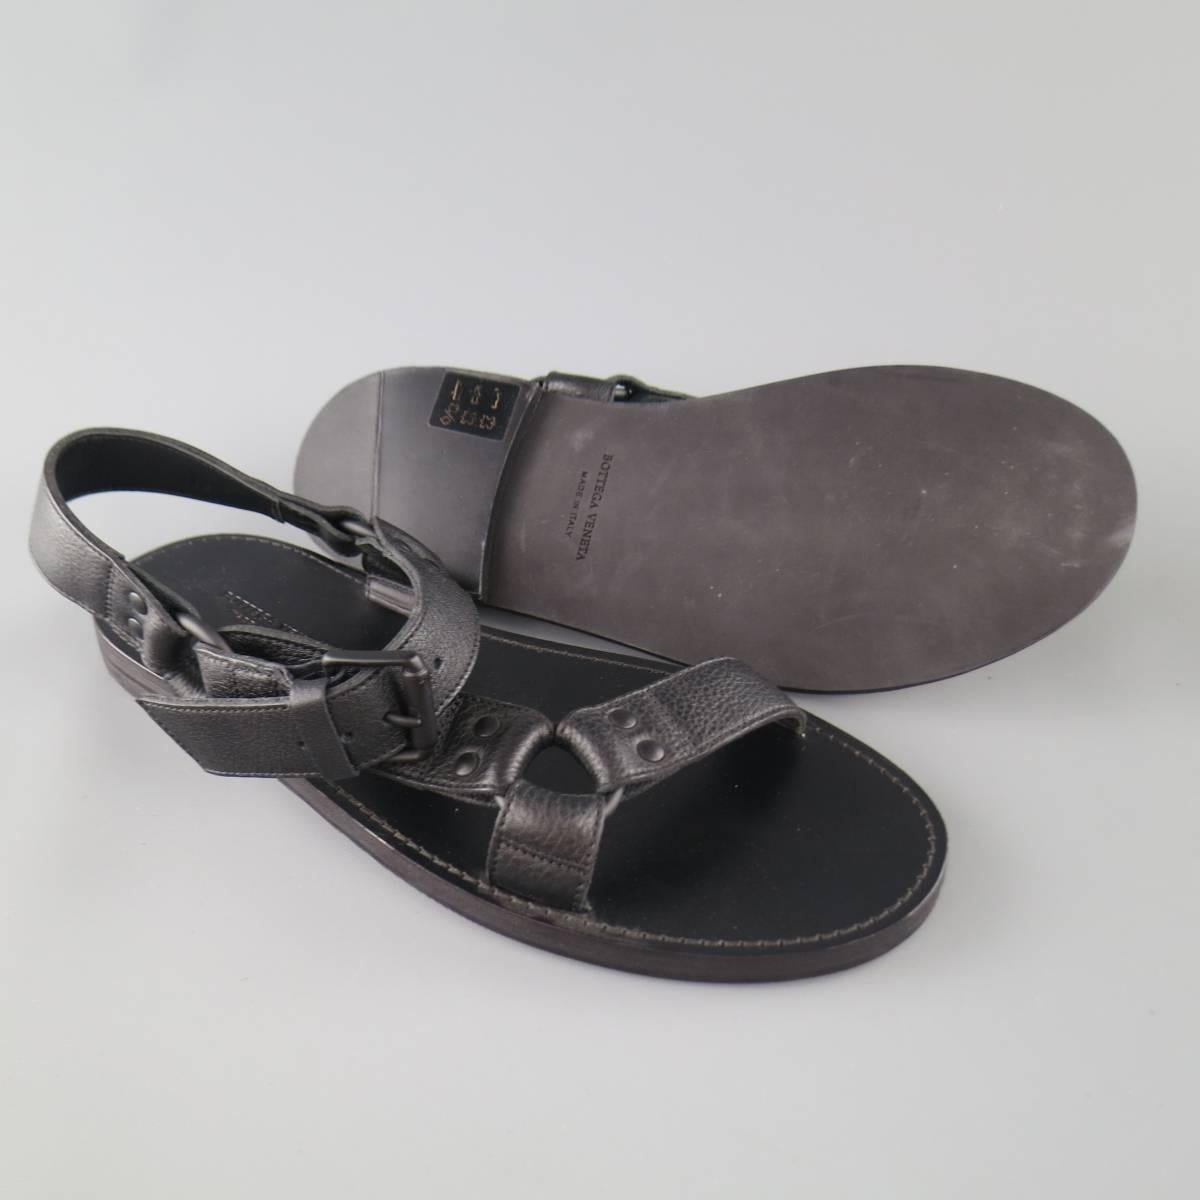 BOTTEGA VENETA sandals feature black textured leather straps, black hardware, and an ankle harness. Made in Italy.
 
Excellent Pre-Owned Condition.
Marked: 42


Web ID: 83154 